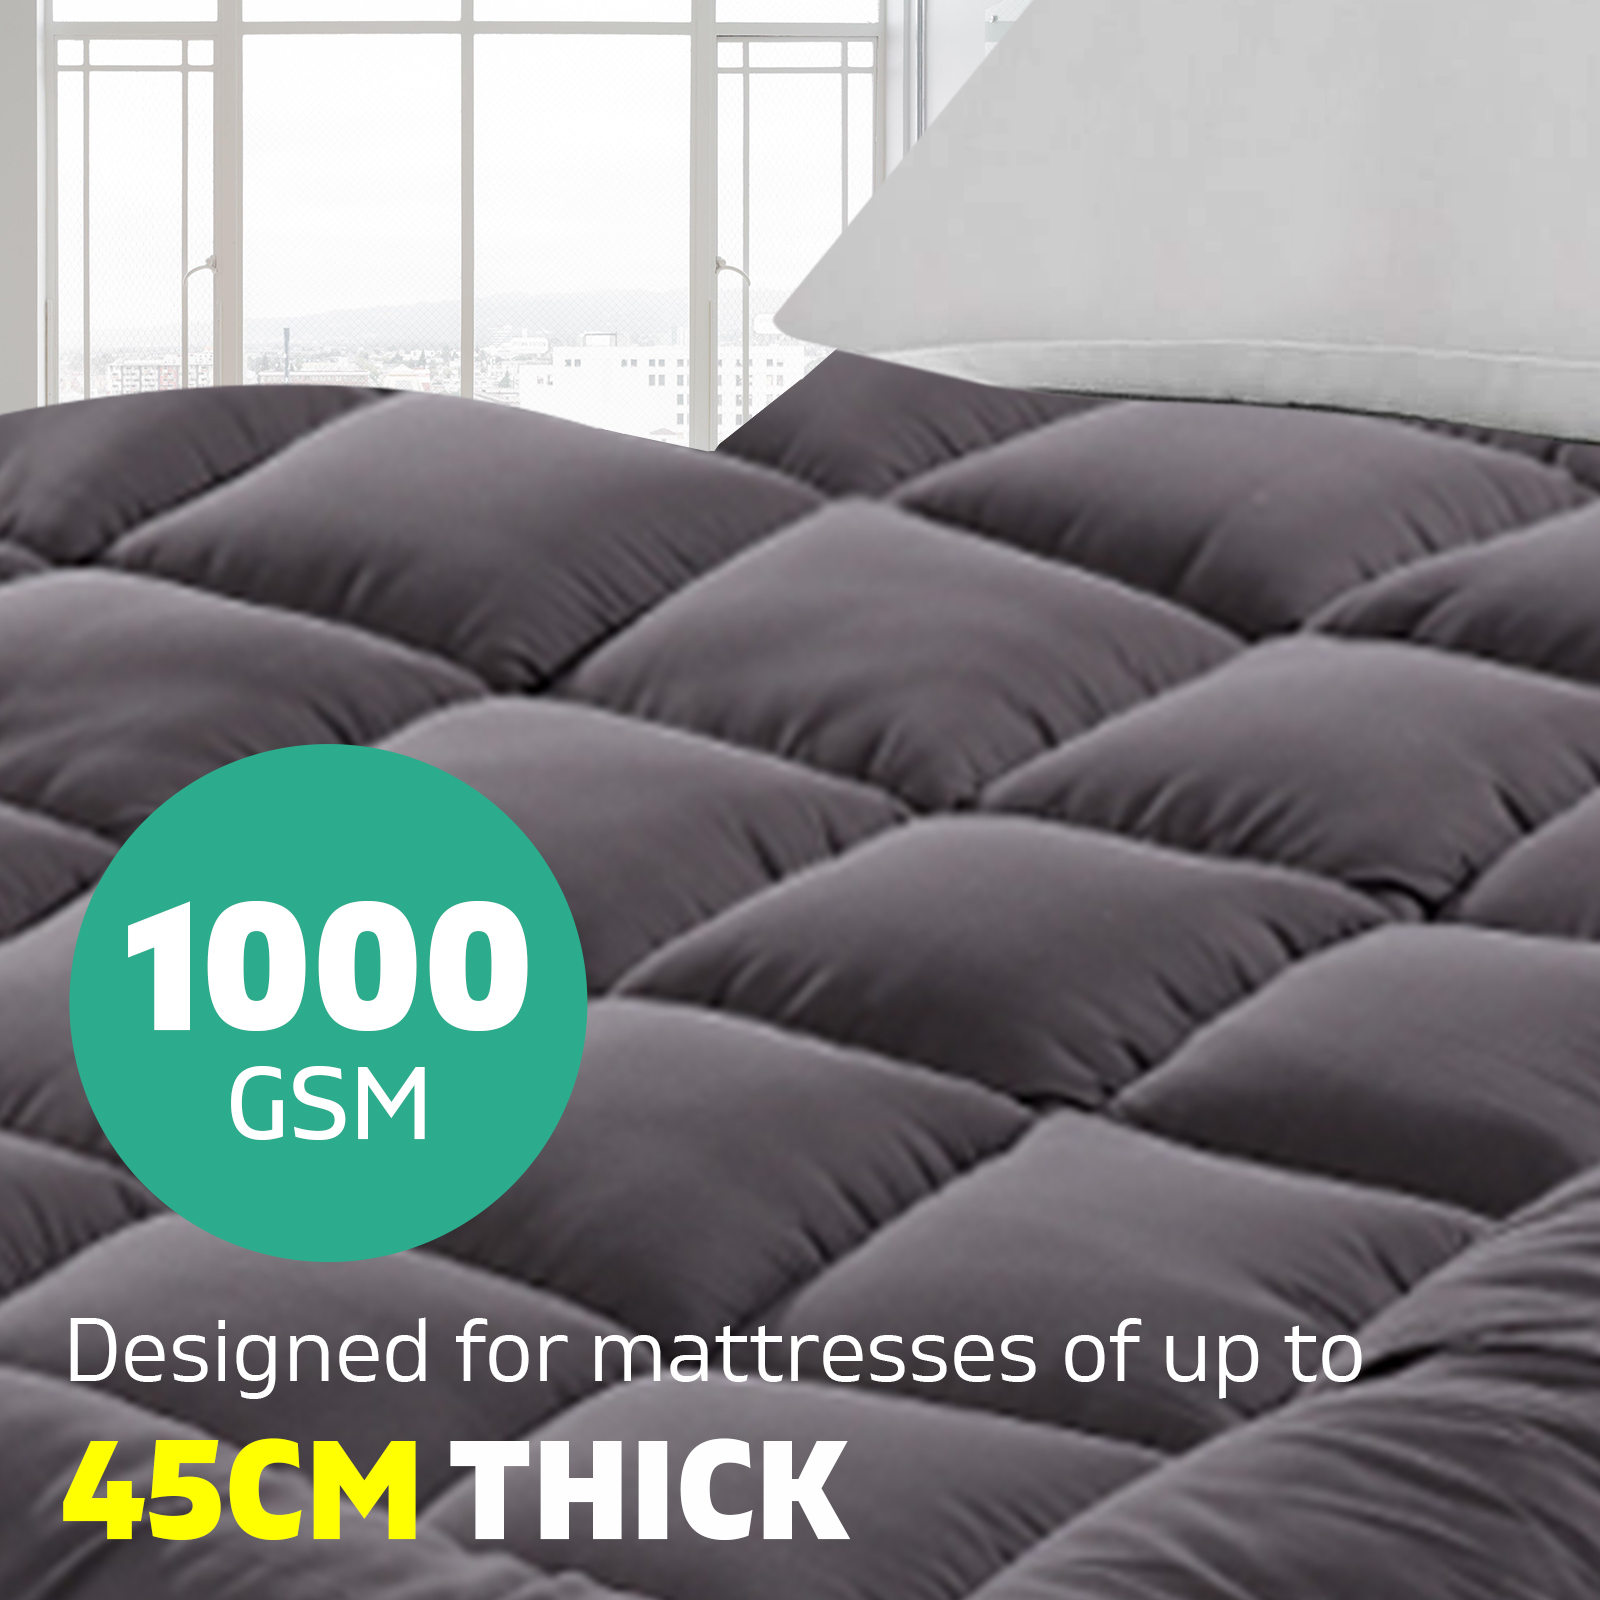 Double Mattress Topper Pillowtop Charcoal Microfibre Bamboo Filling Protect